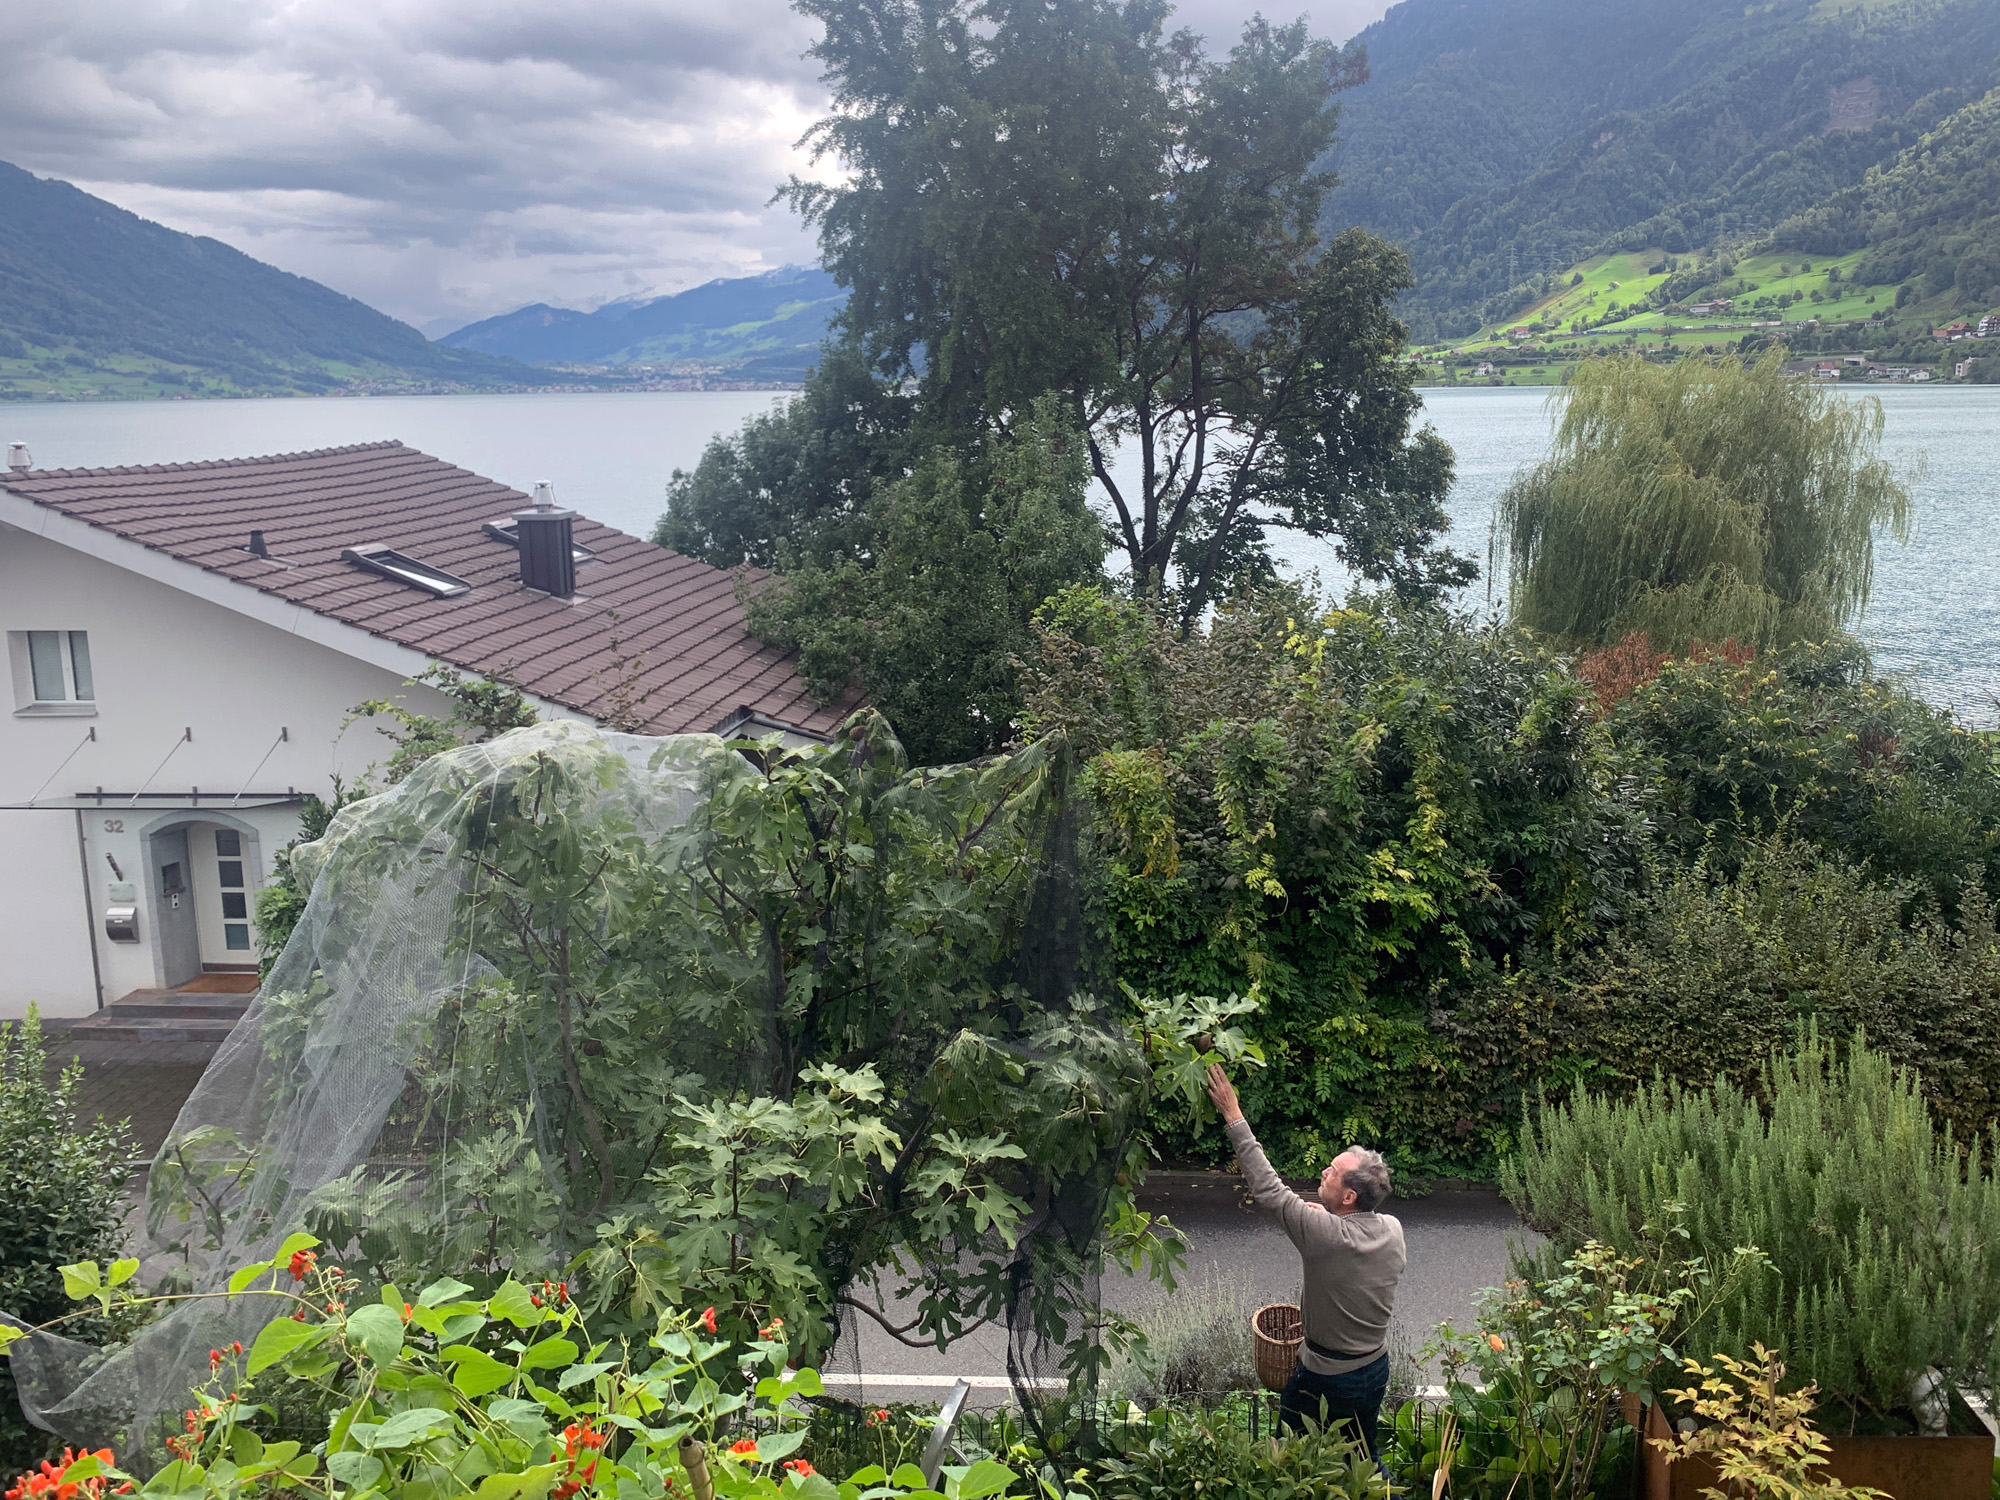 René picks Figs from the Fig tree in the backyard on Sept. 17, 2022, in Lucerne, Switzerland.